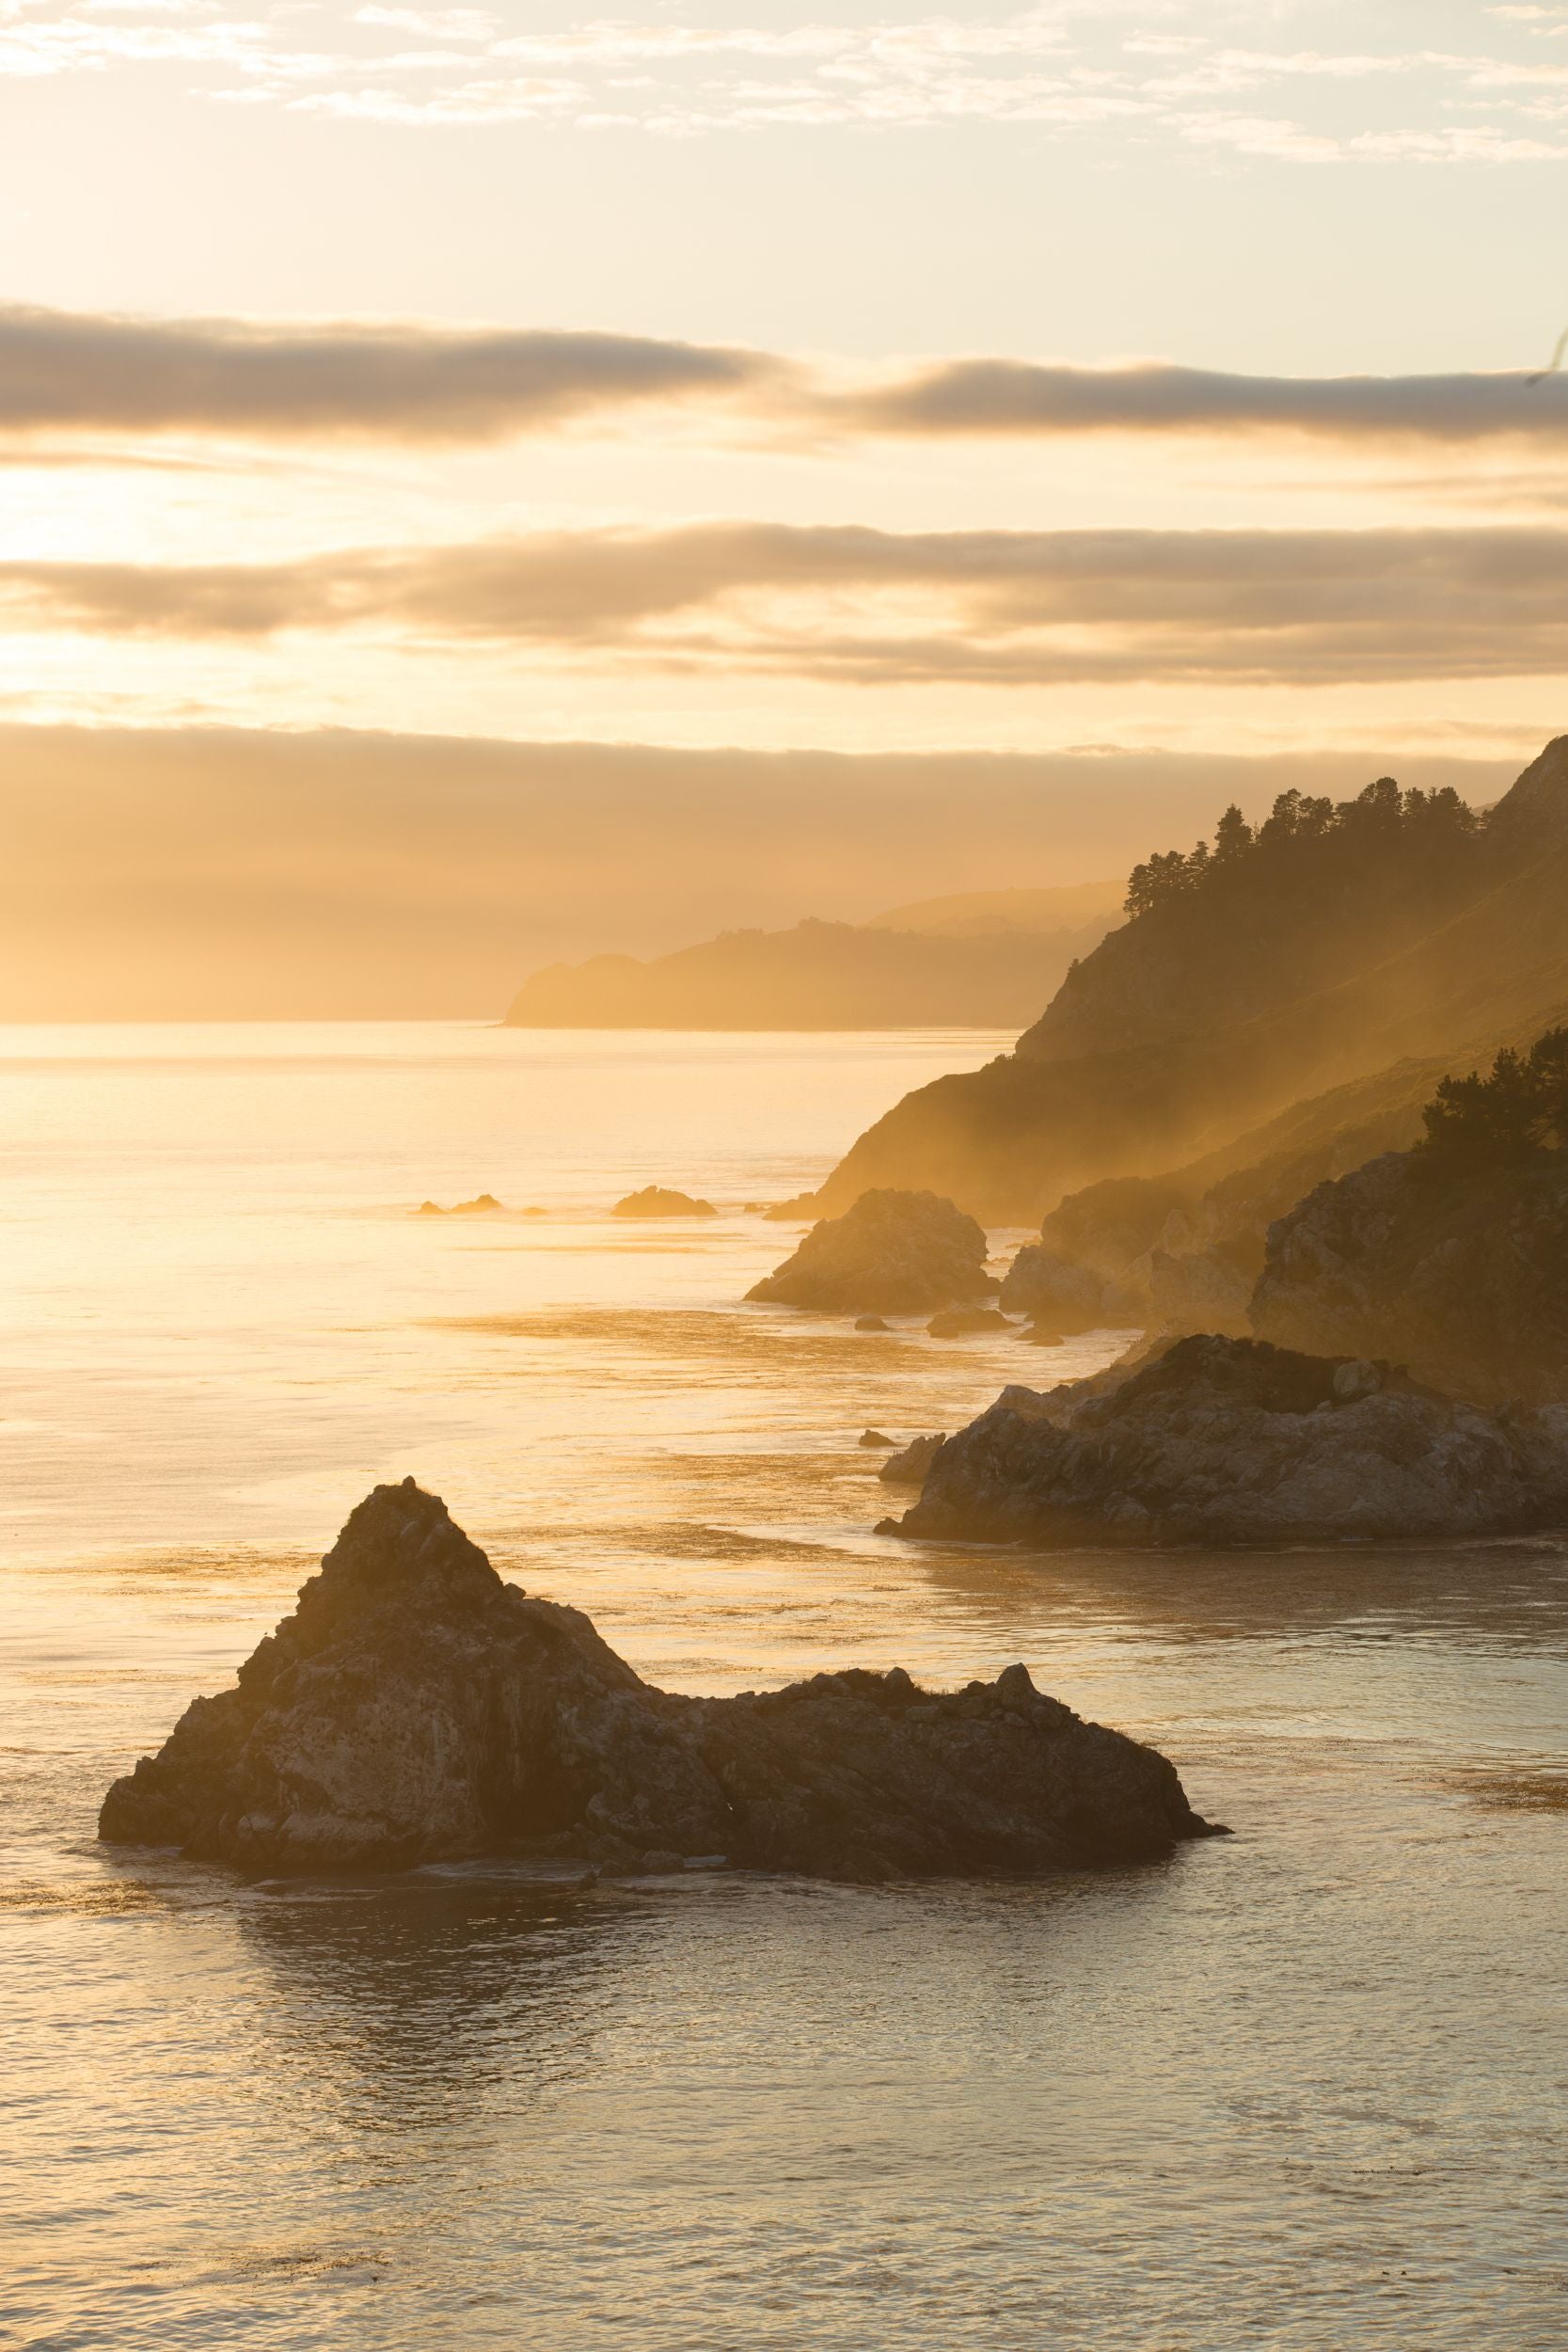 The sun casts a golden hue across the rocky shore of the Pacific ocean in Big Sur.